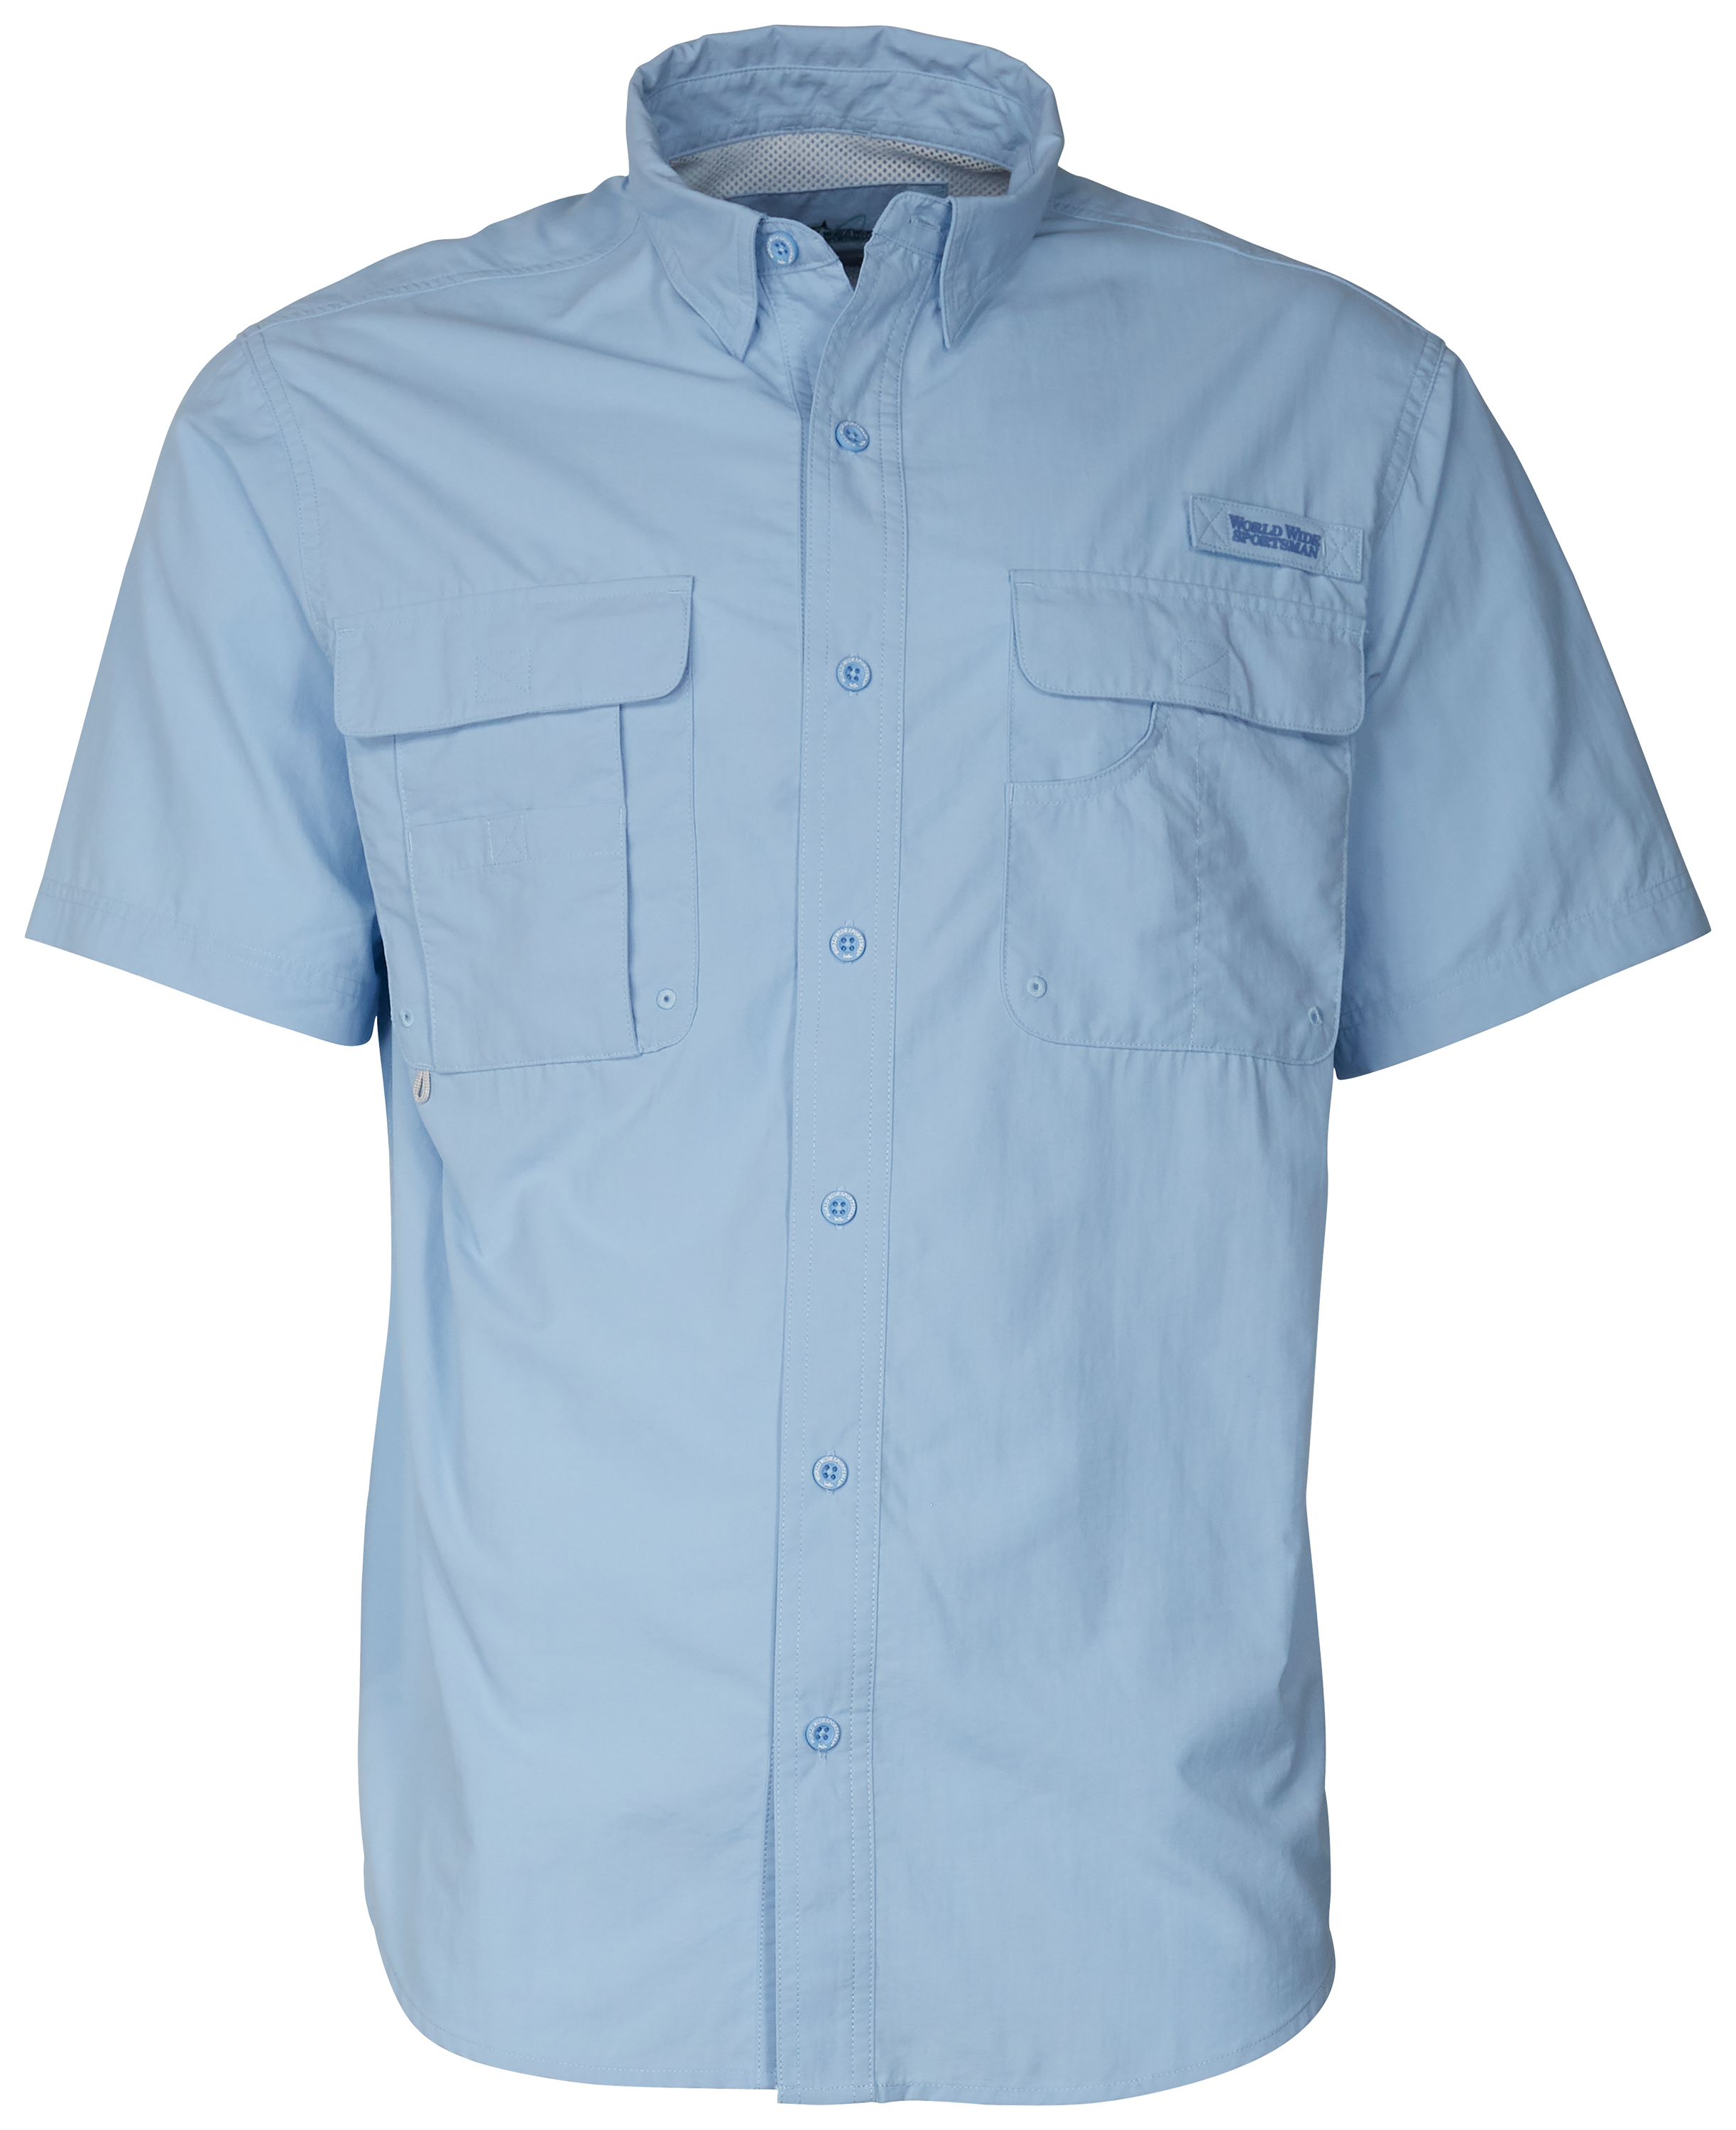 World Wide Sportsman Recycled-Nylon Angler 2.0 Short-Sleeve Button-Down Shirt for Men - Placid Blue - L